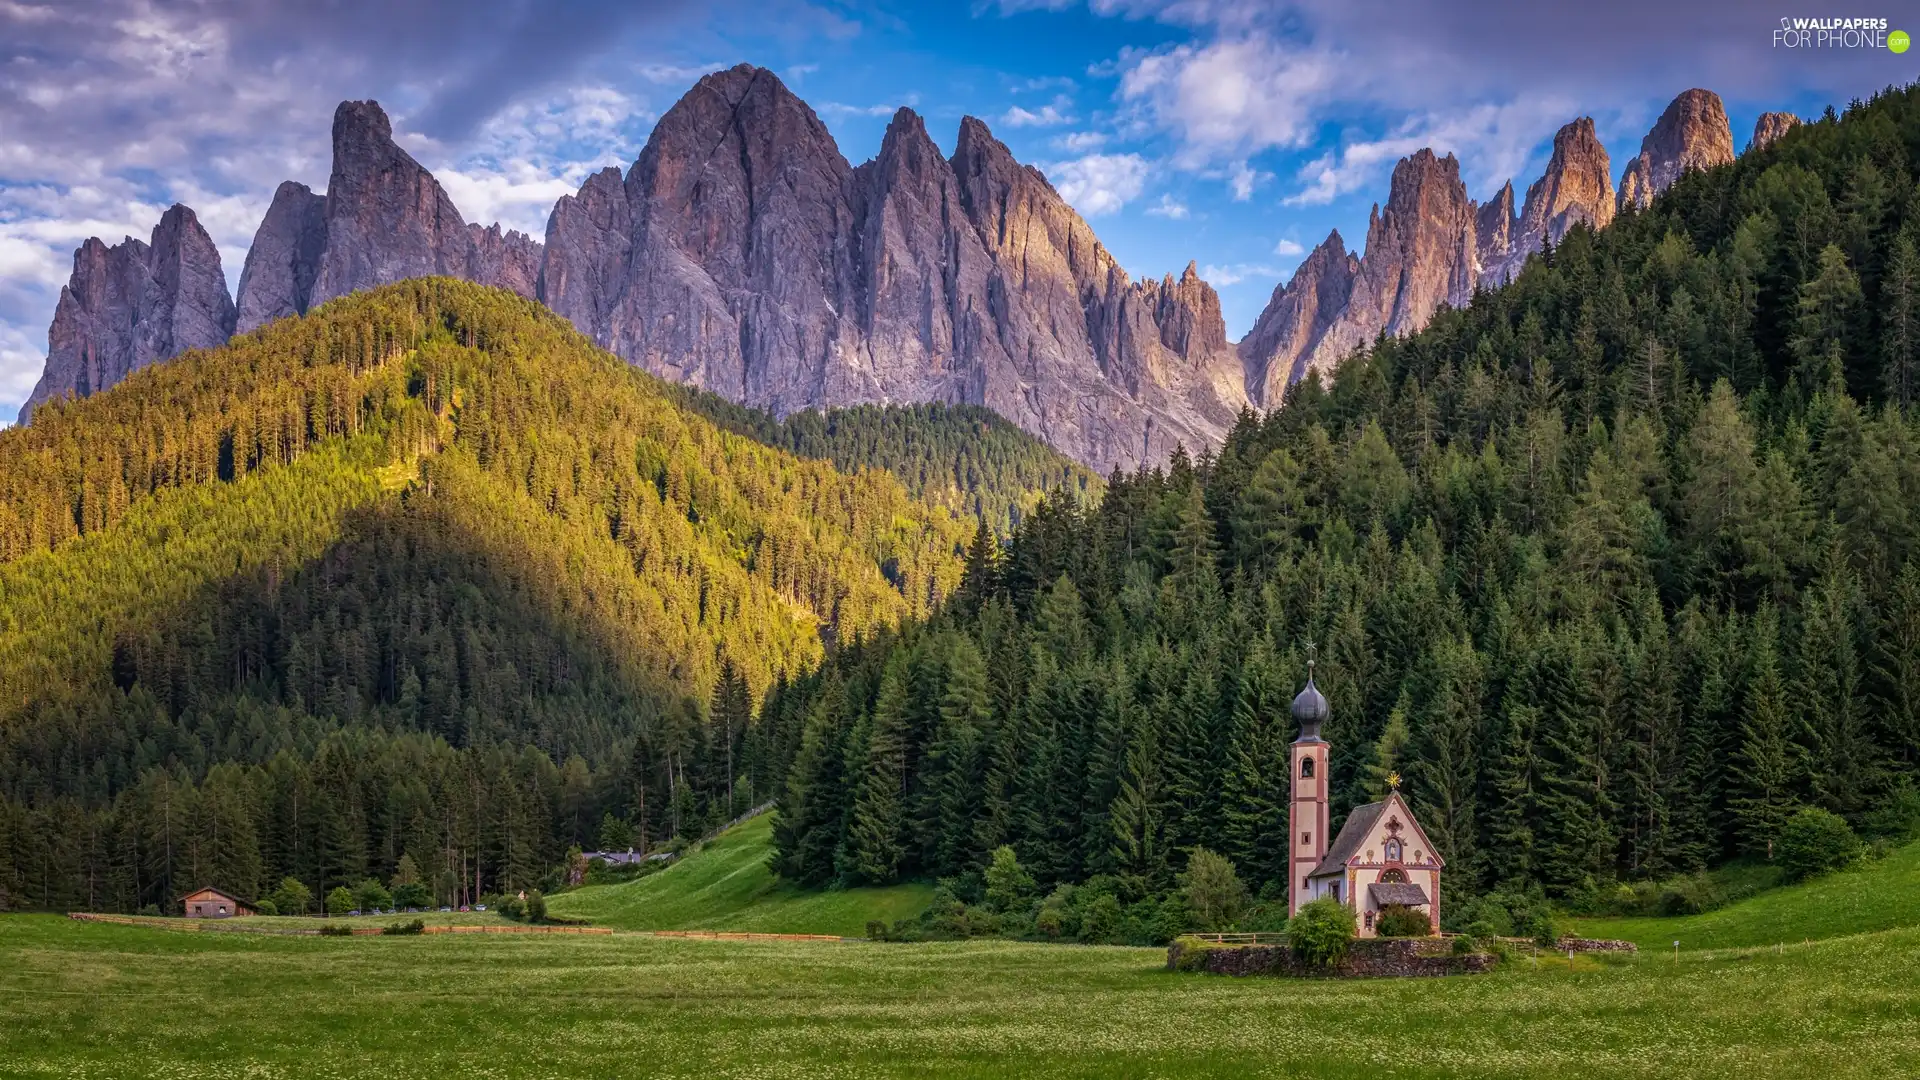 Dolomites, Val di Funes Valley, Church of St. John, Mountains, Italy, Massif Odle, clouds